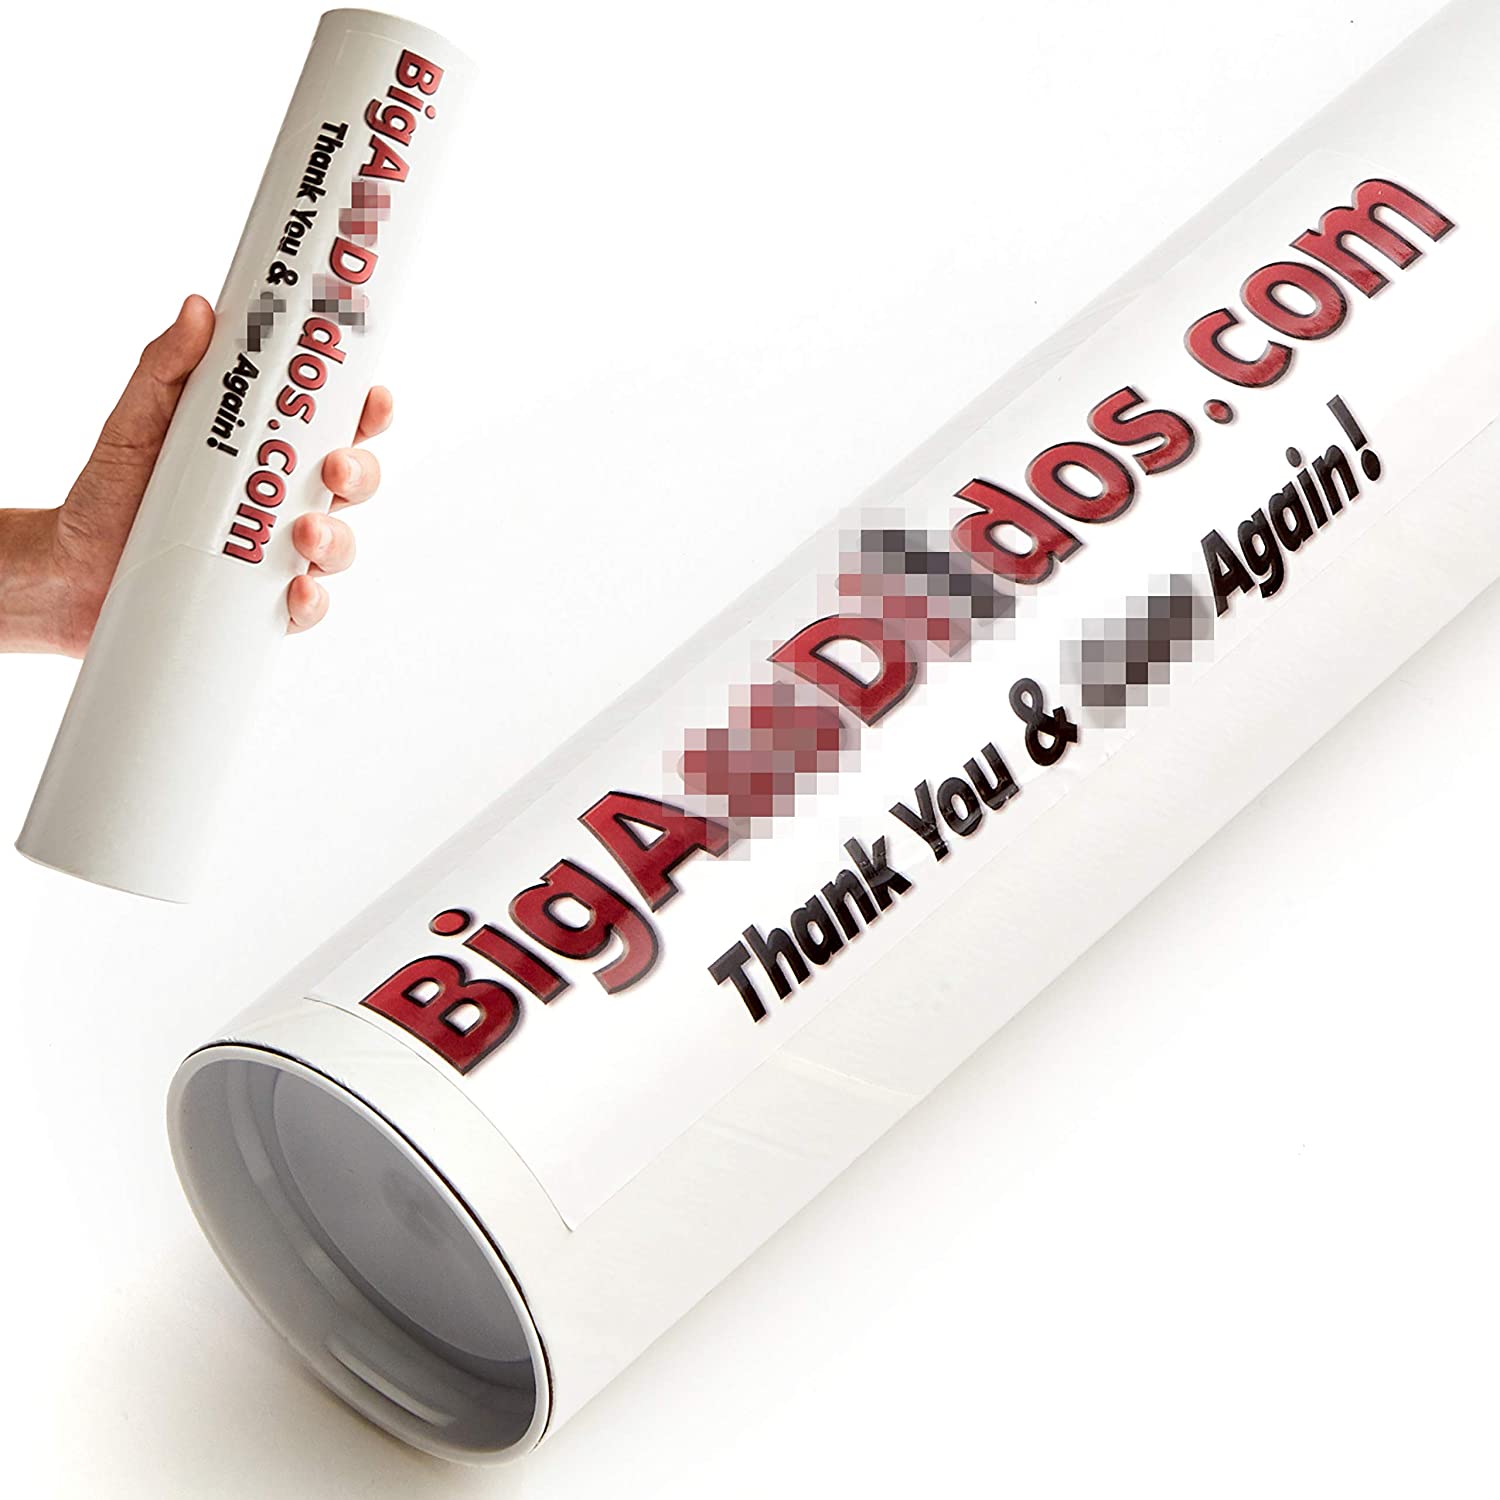 Wholesale Super Hilarious, Novelty Prank Mail Tube. We'll Ship an  Anonymous, Embarrassing Package to Mortify and Offend Your Friends. Get  Revenge with The Best Funny Adult Gag Gift and Practical Joke Packaging |